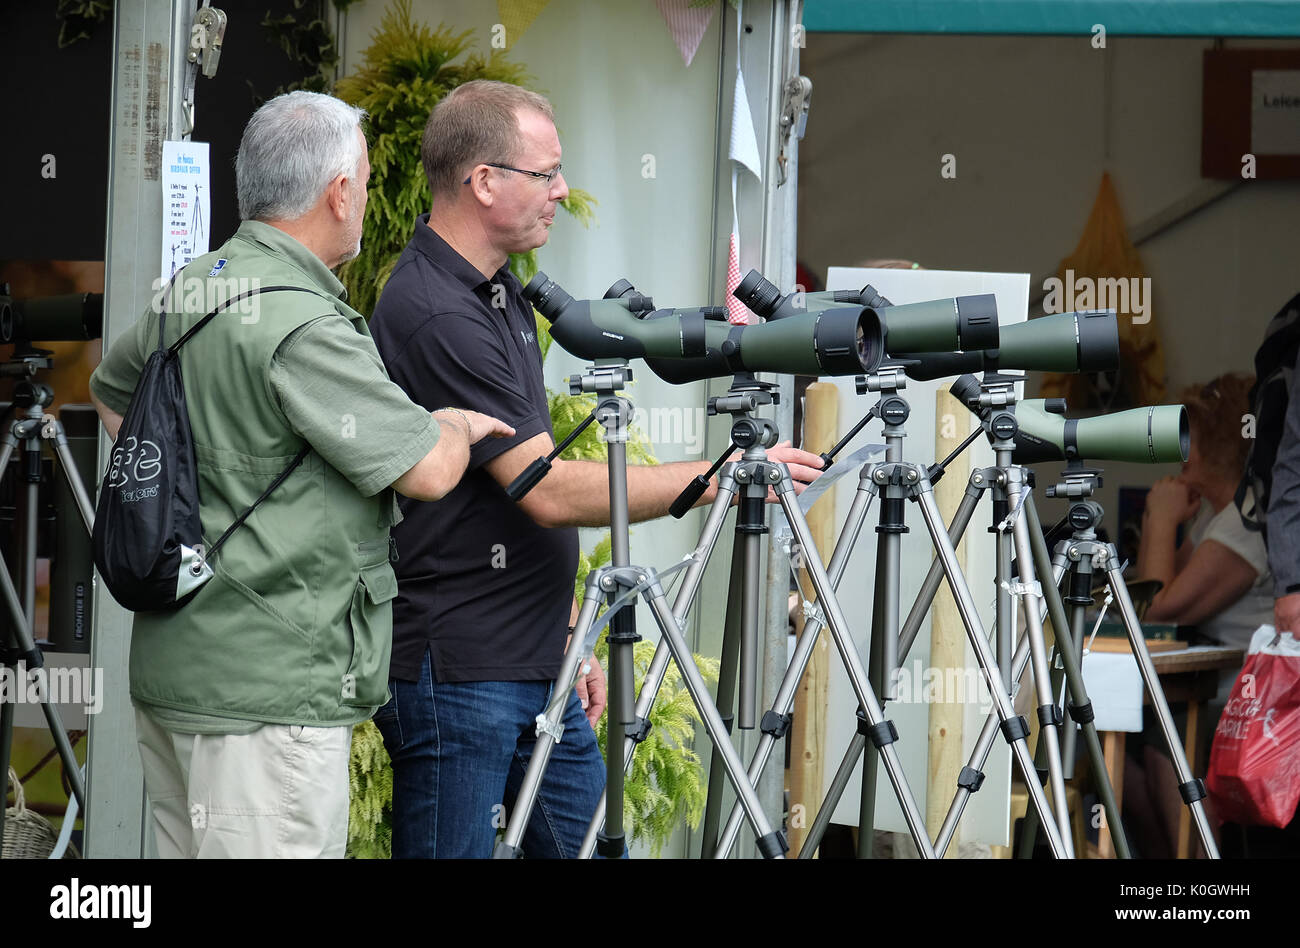 Men looking at sellection of new wildlife nigh magnification spotting scopes. Stock Photo